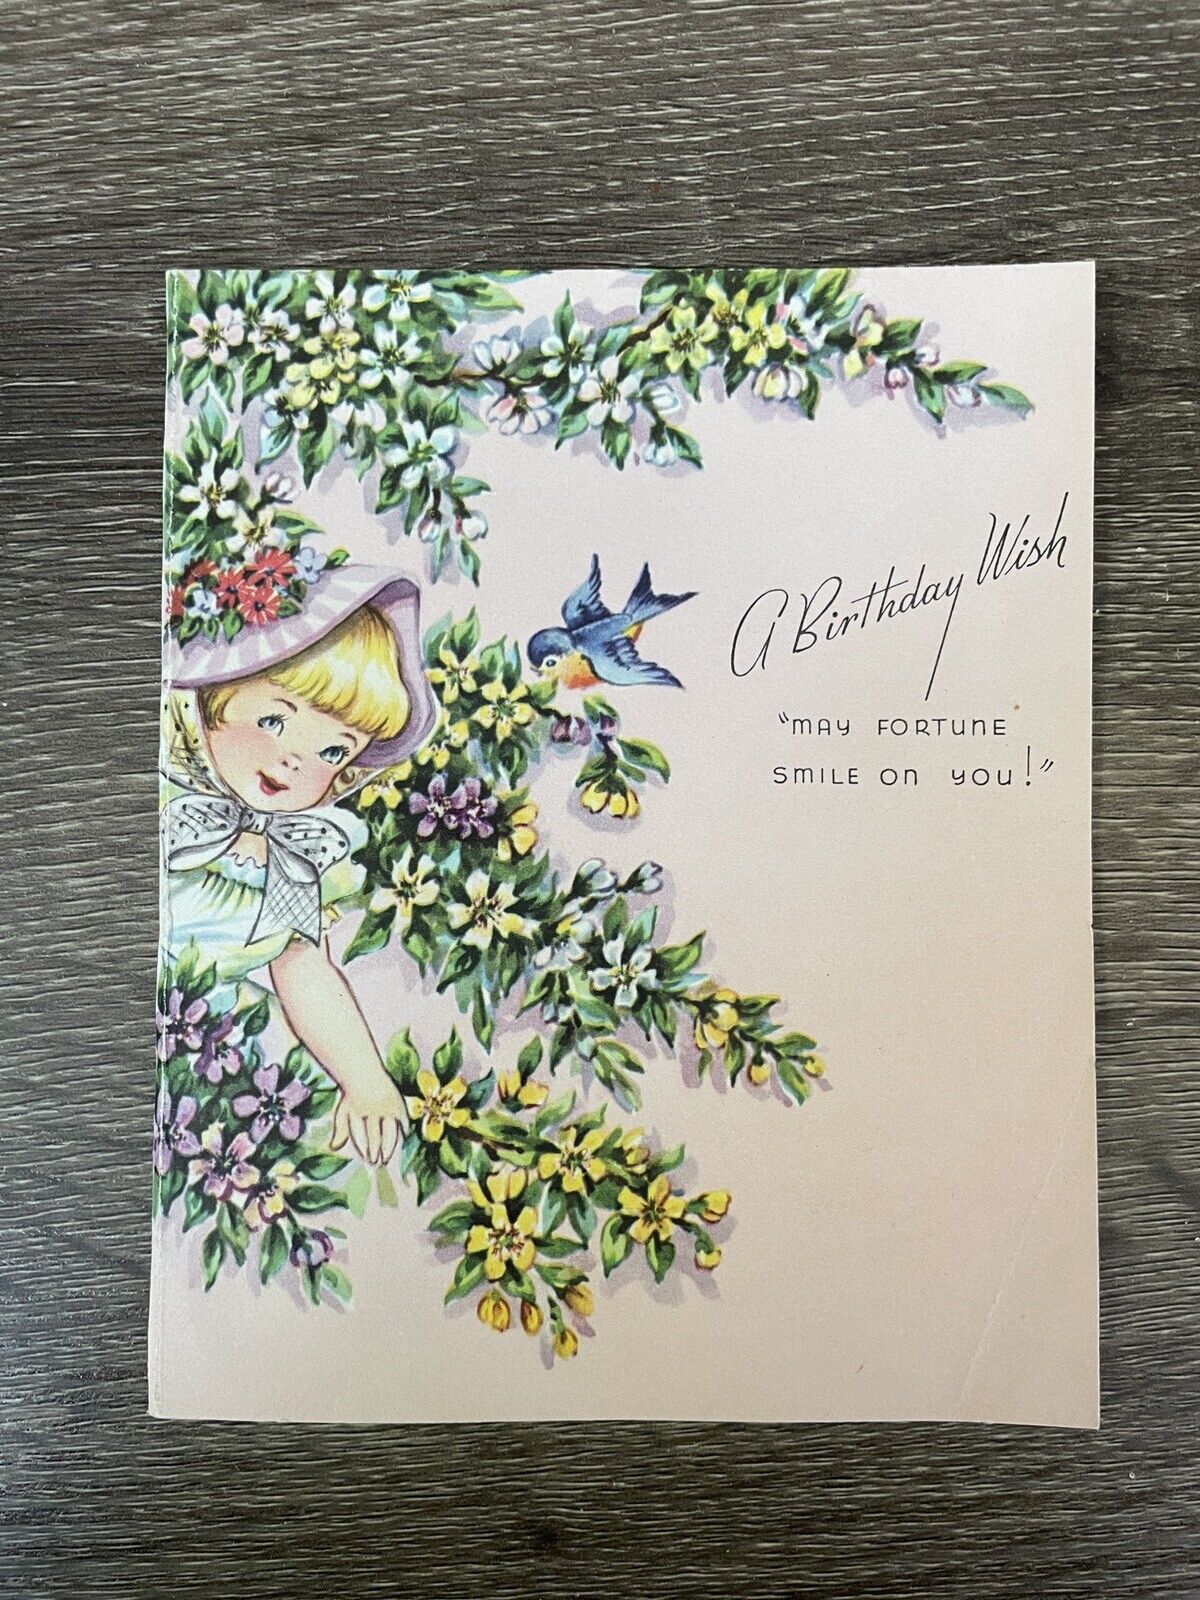 Vintage Birthday Card, May Fortune Smile On You, Used